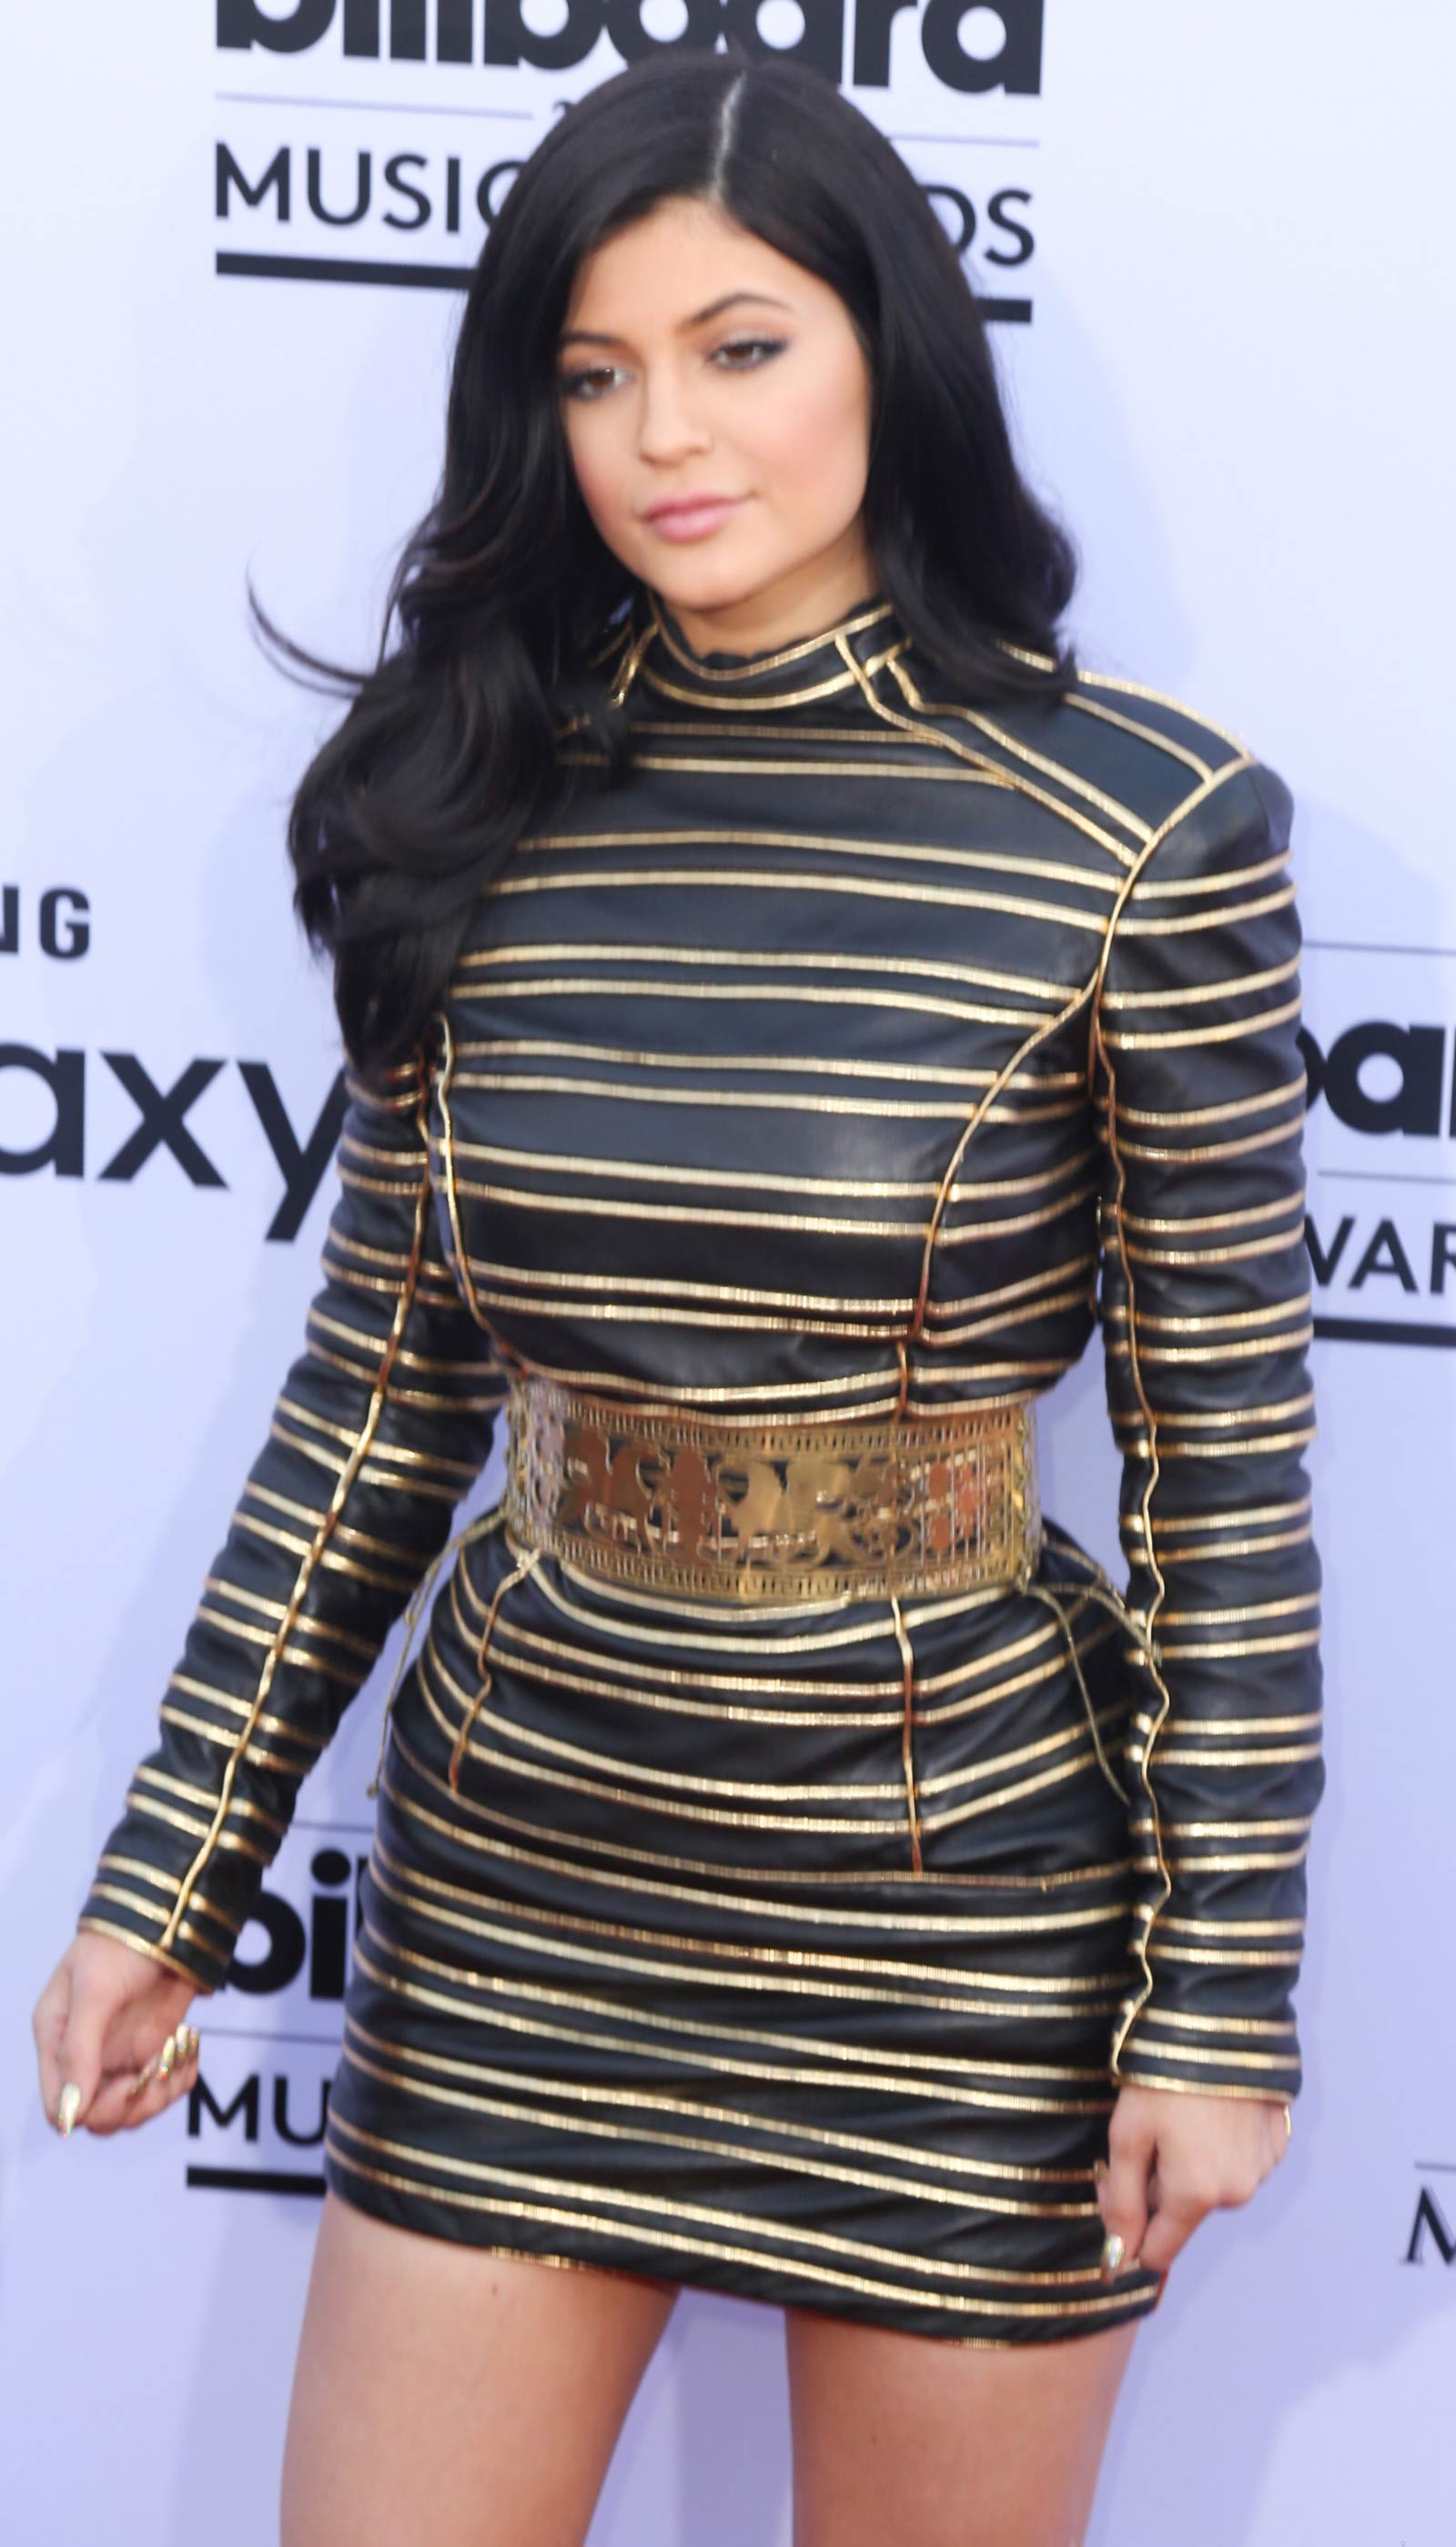 Kylie Jenner attends the 2015 Billboard Music Awards